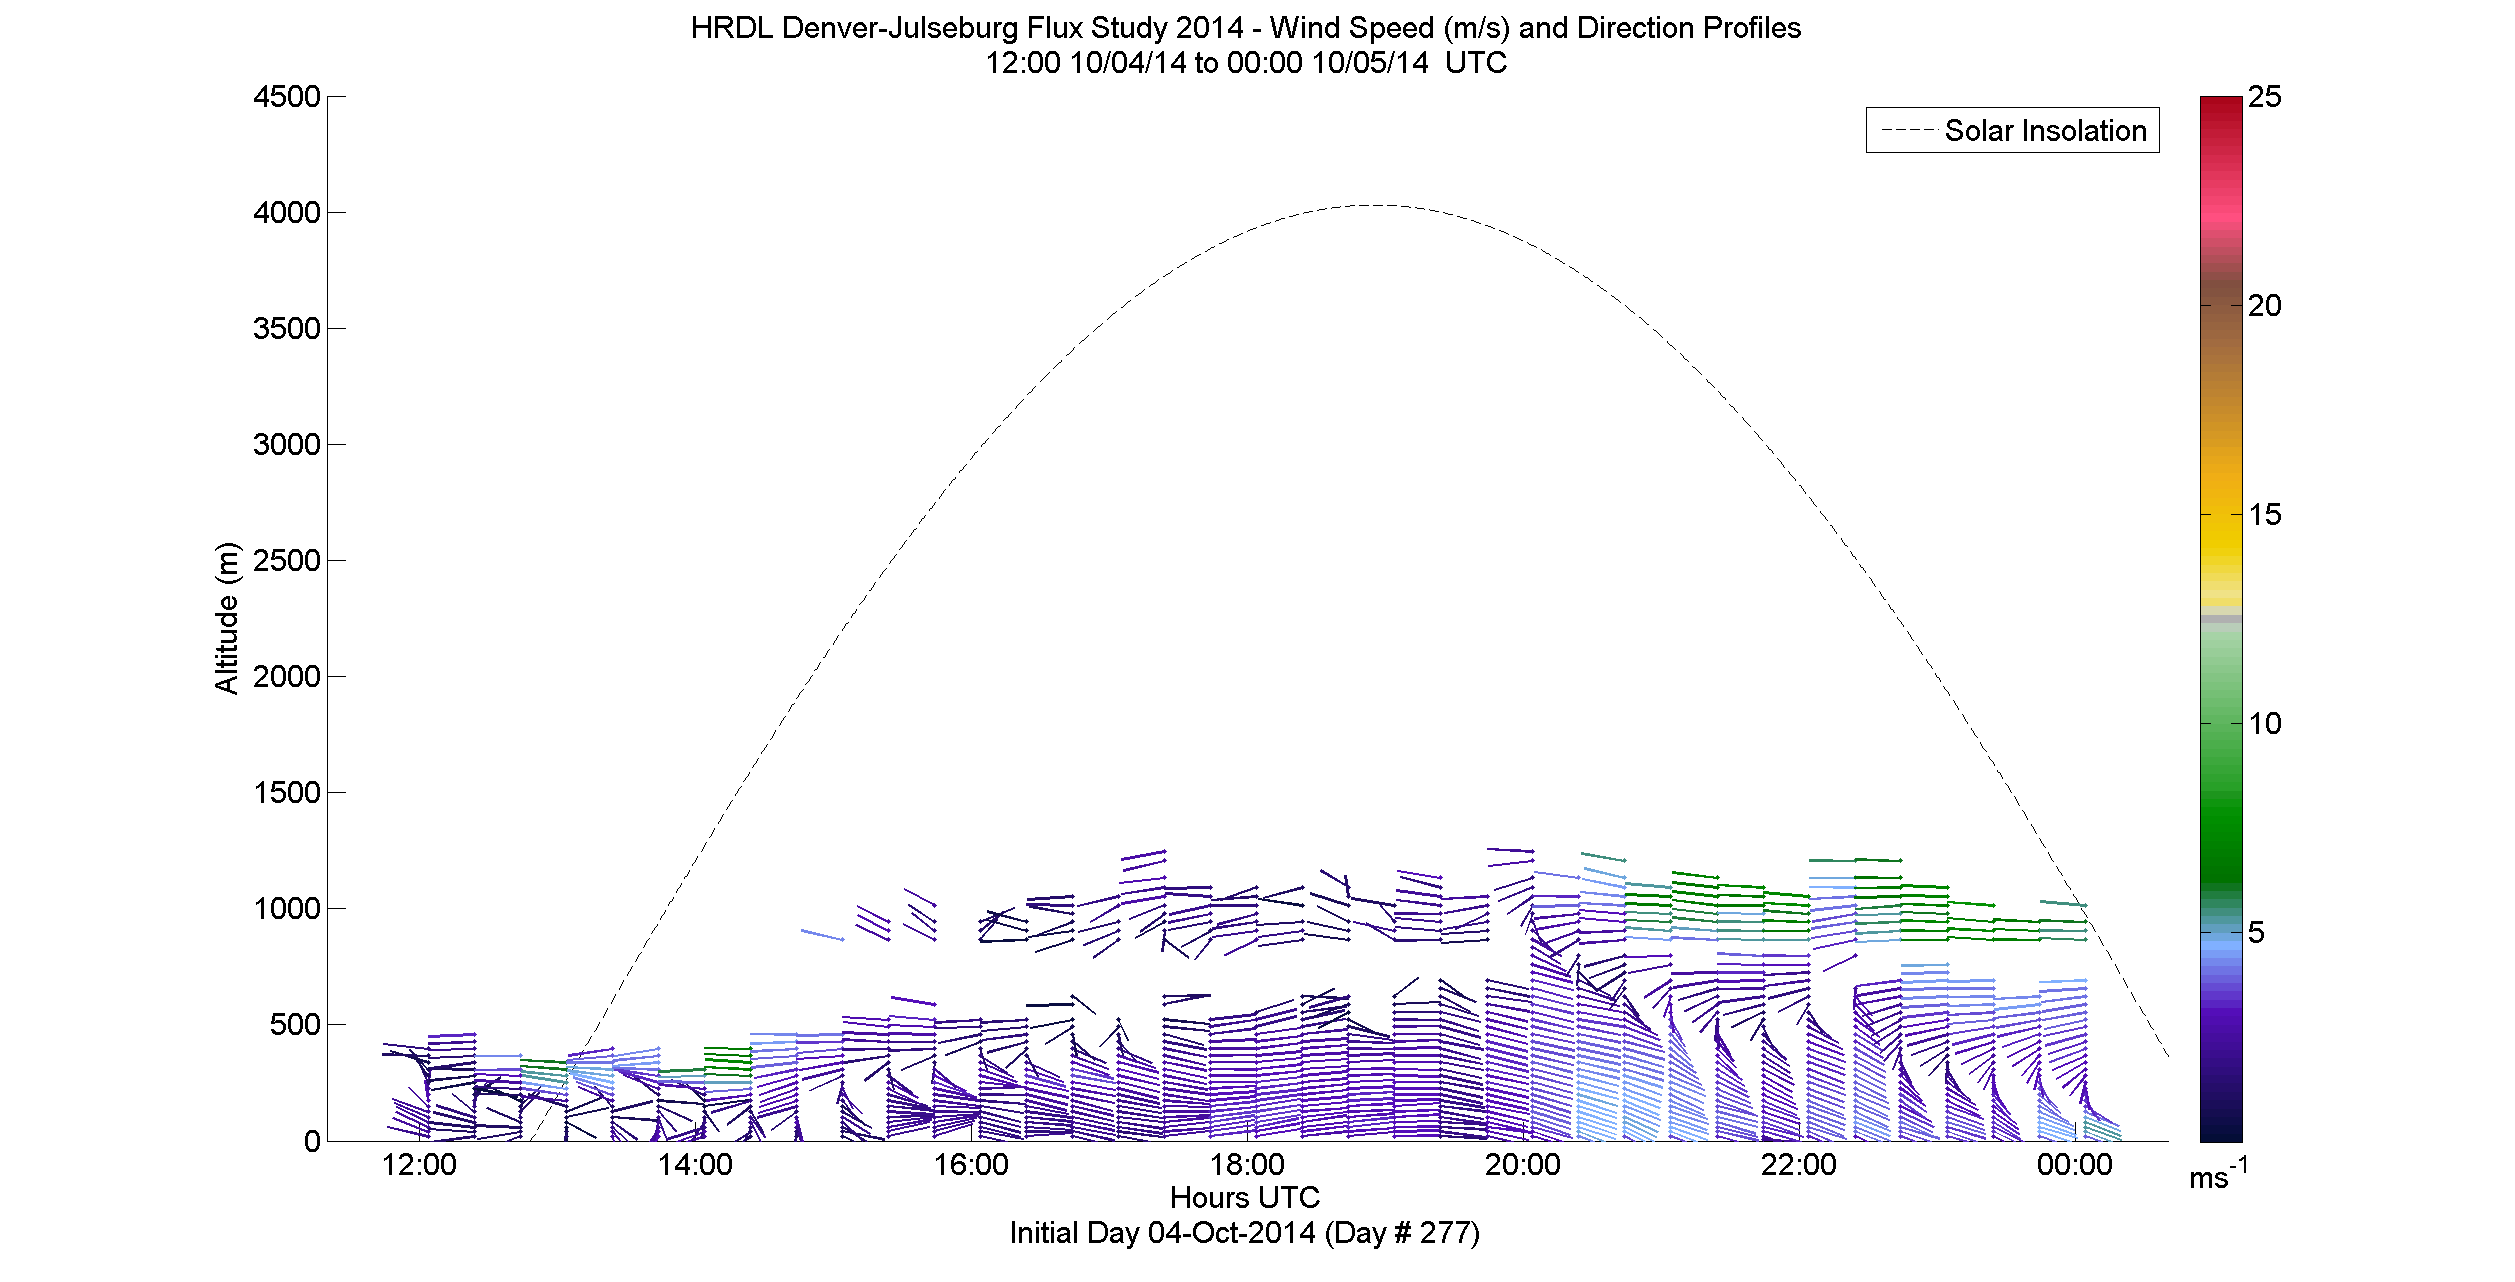 HRDL speed and direction profile - October 4 pm